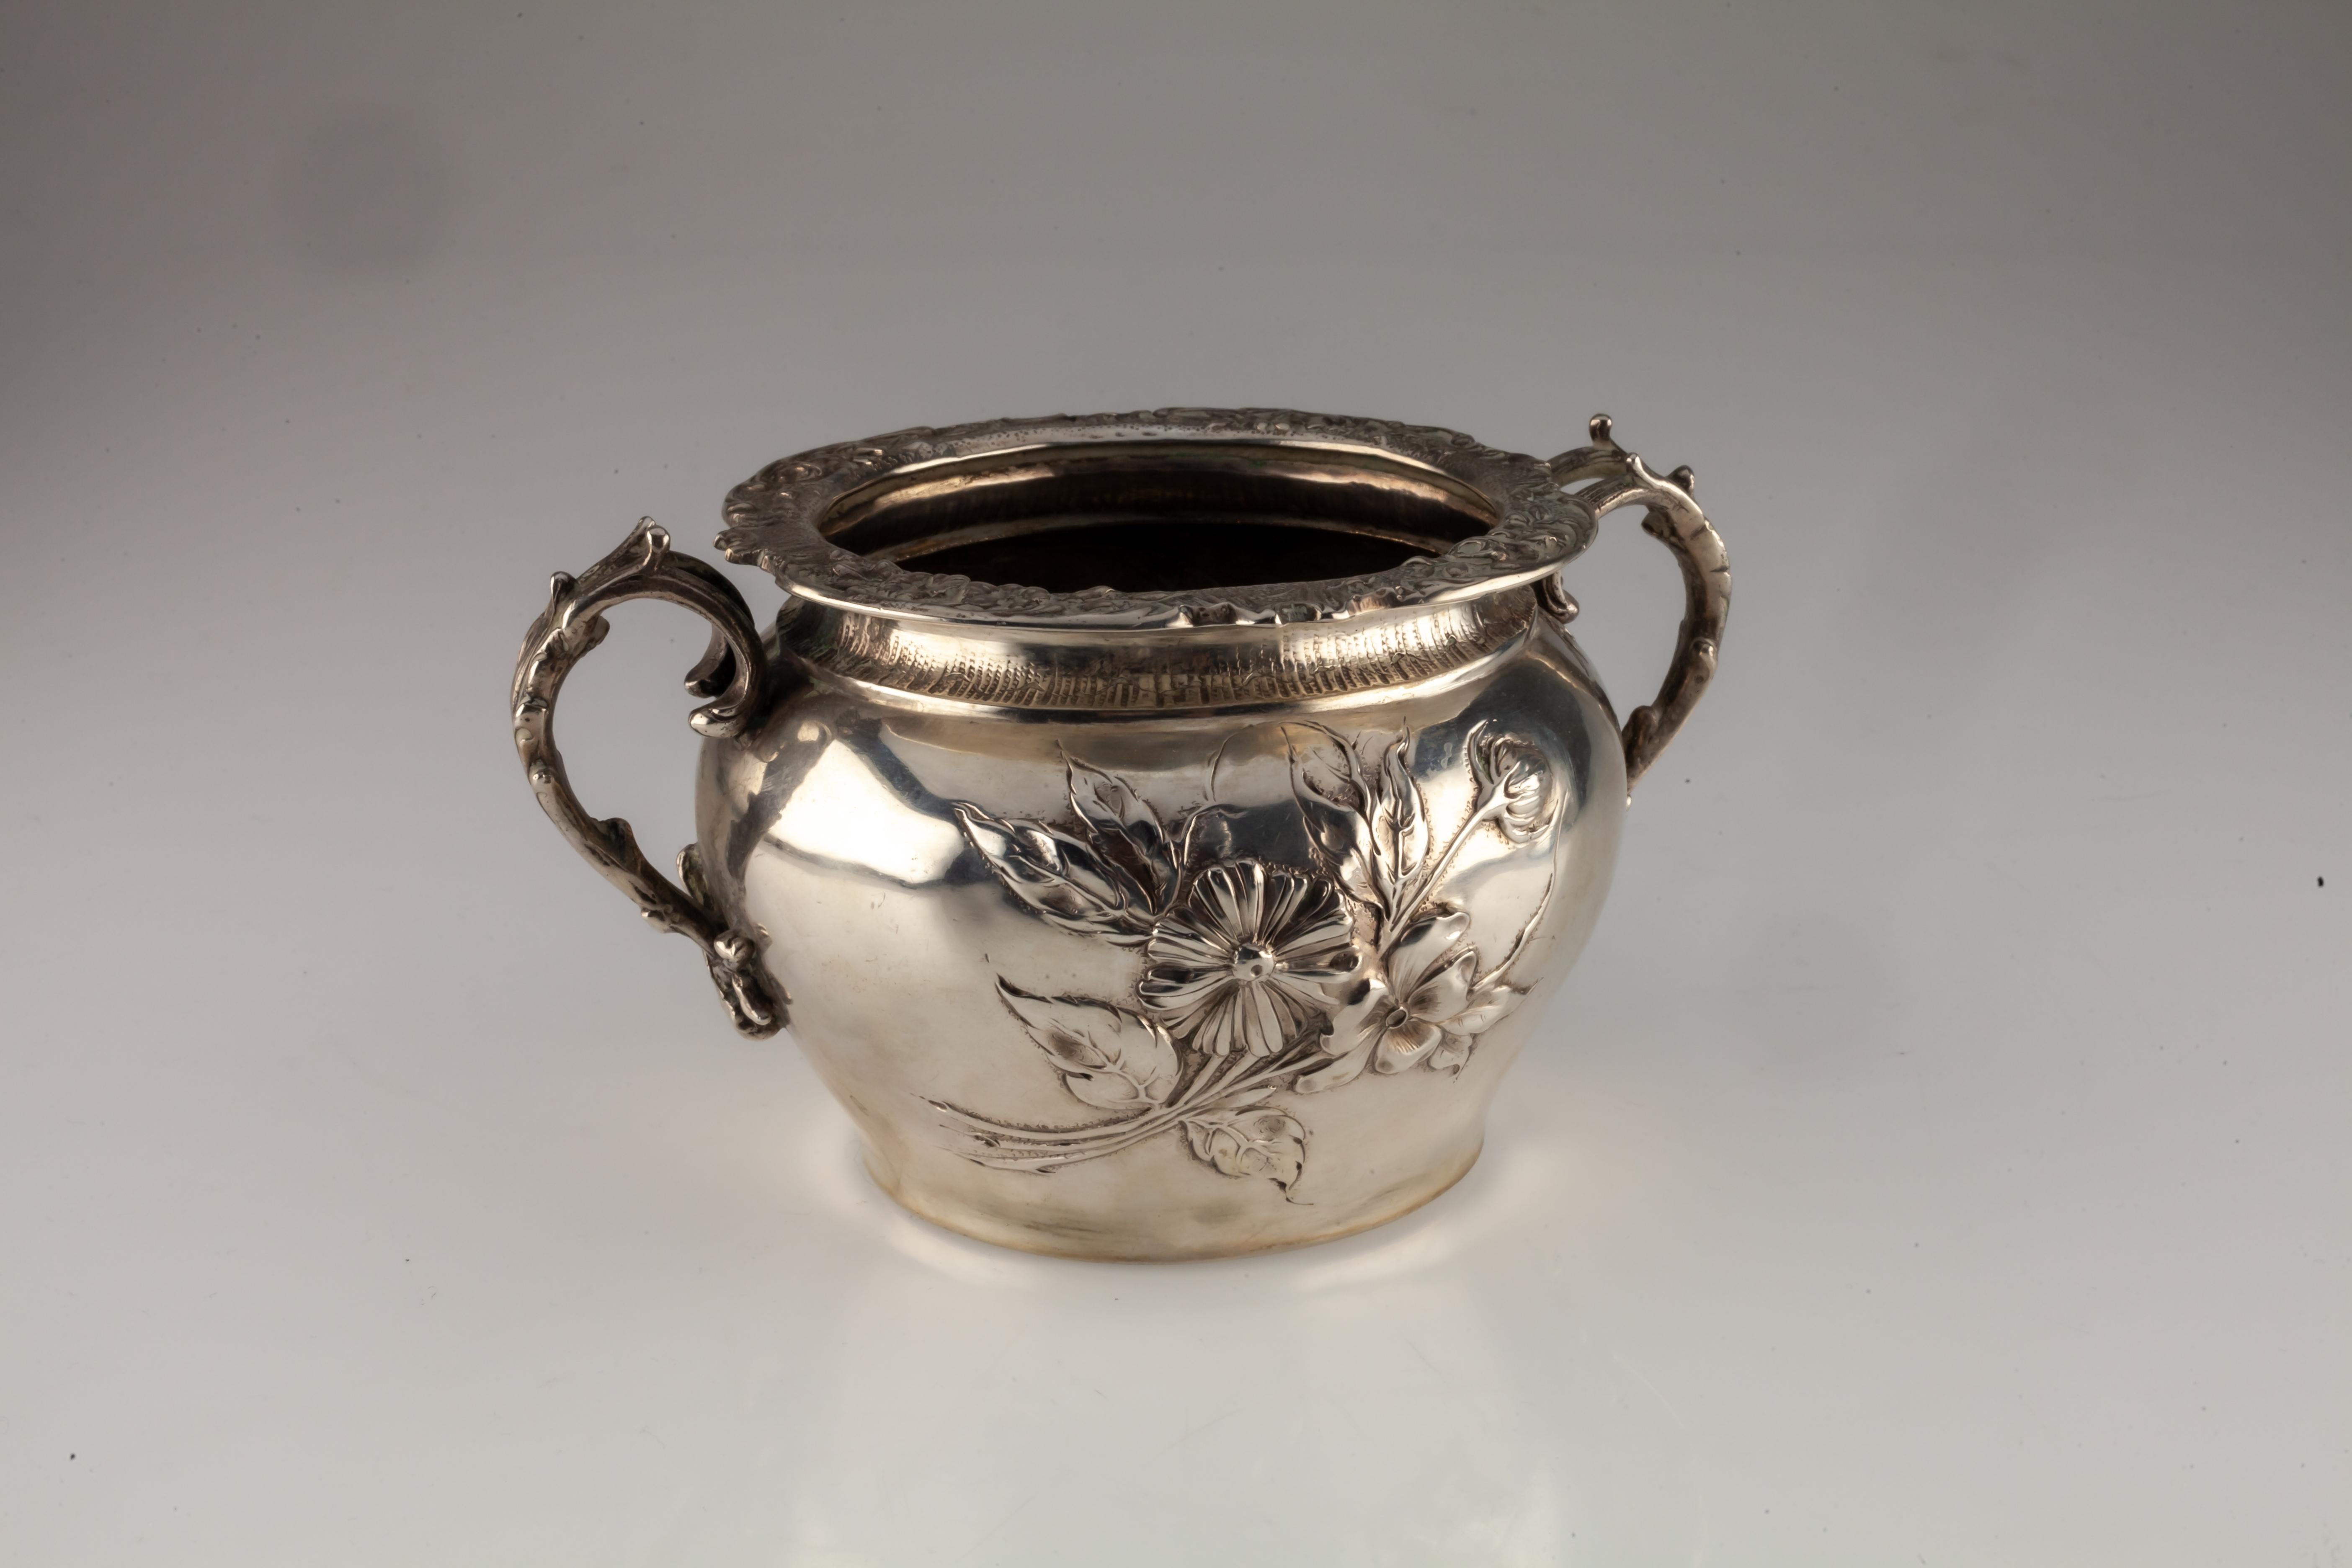 Neoclassical Ornate Sterling Silver British Tea/Coffee Set 1930s Hand-Chased For Sale